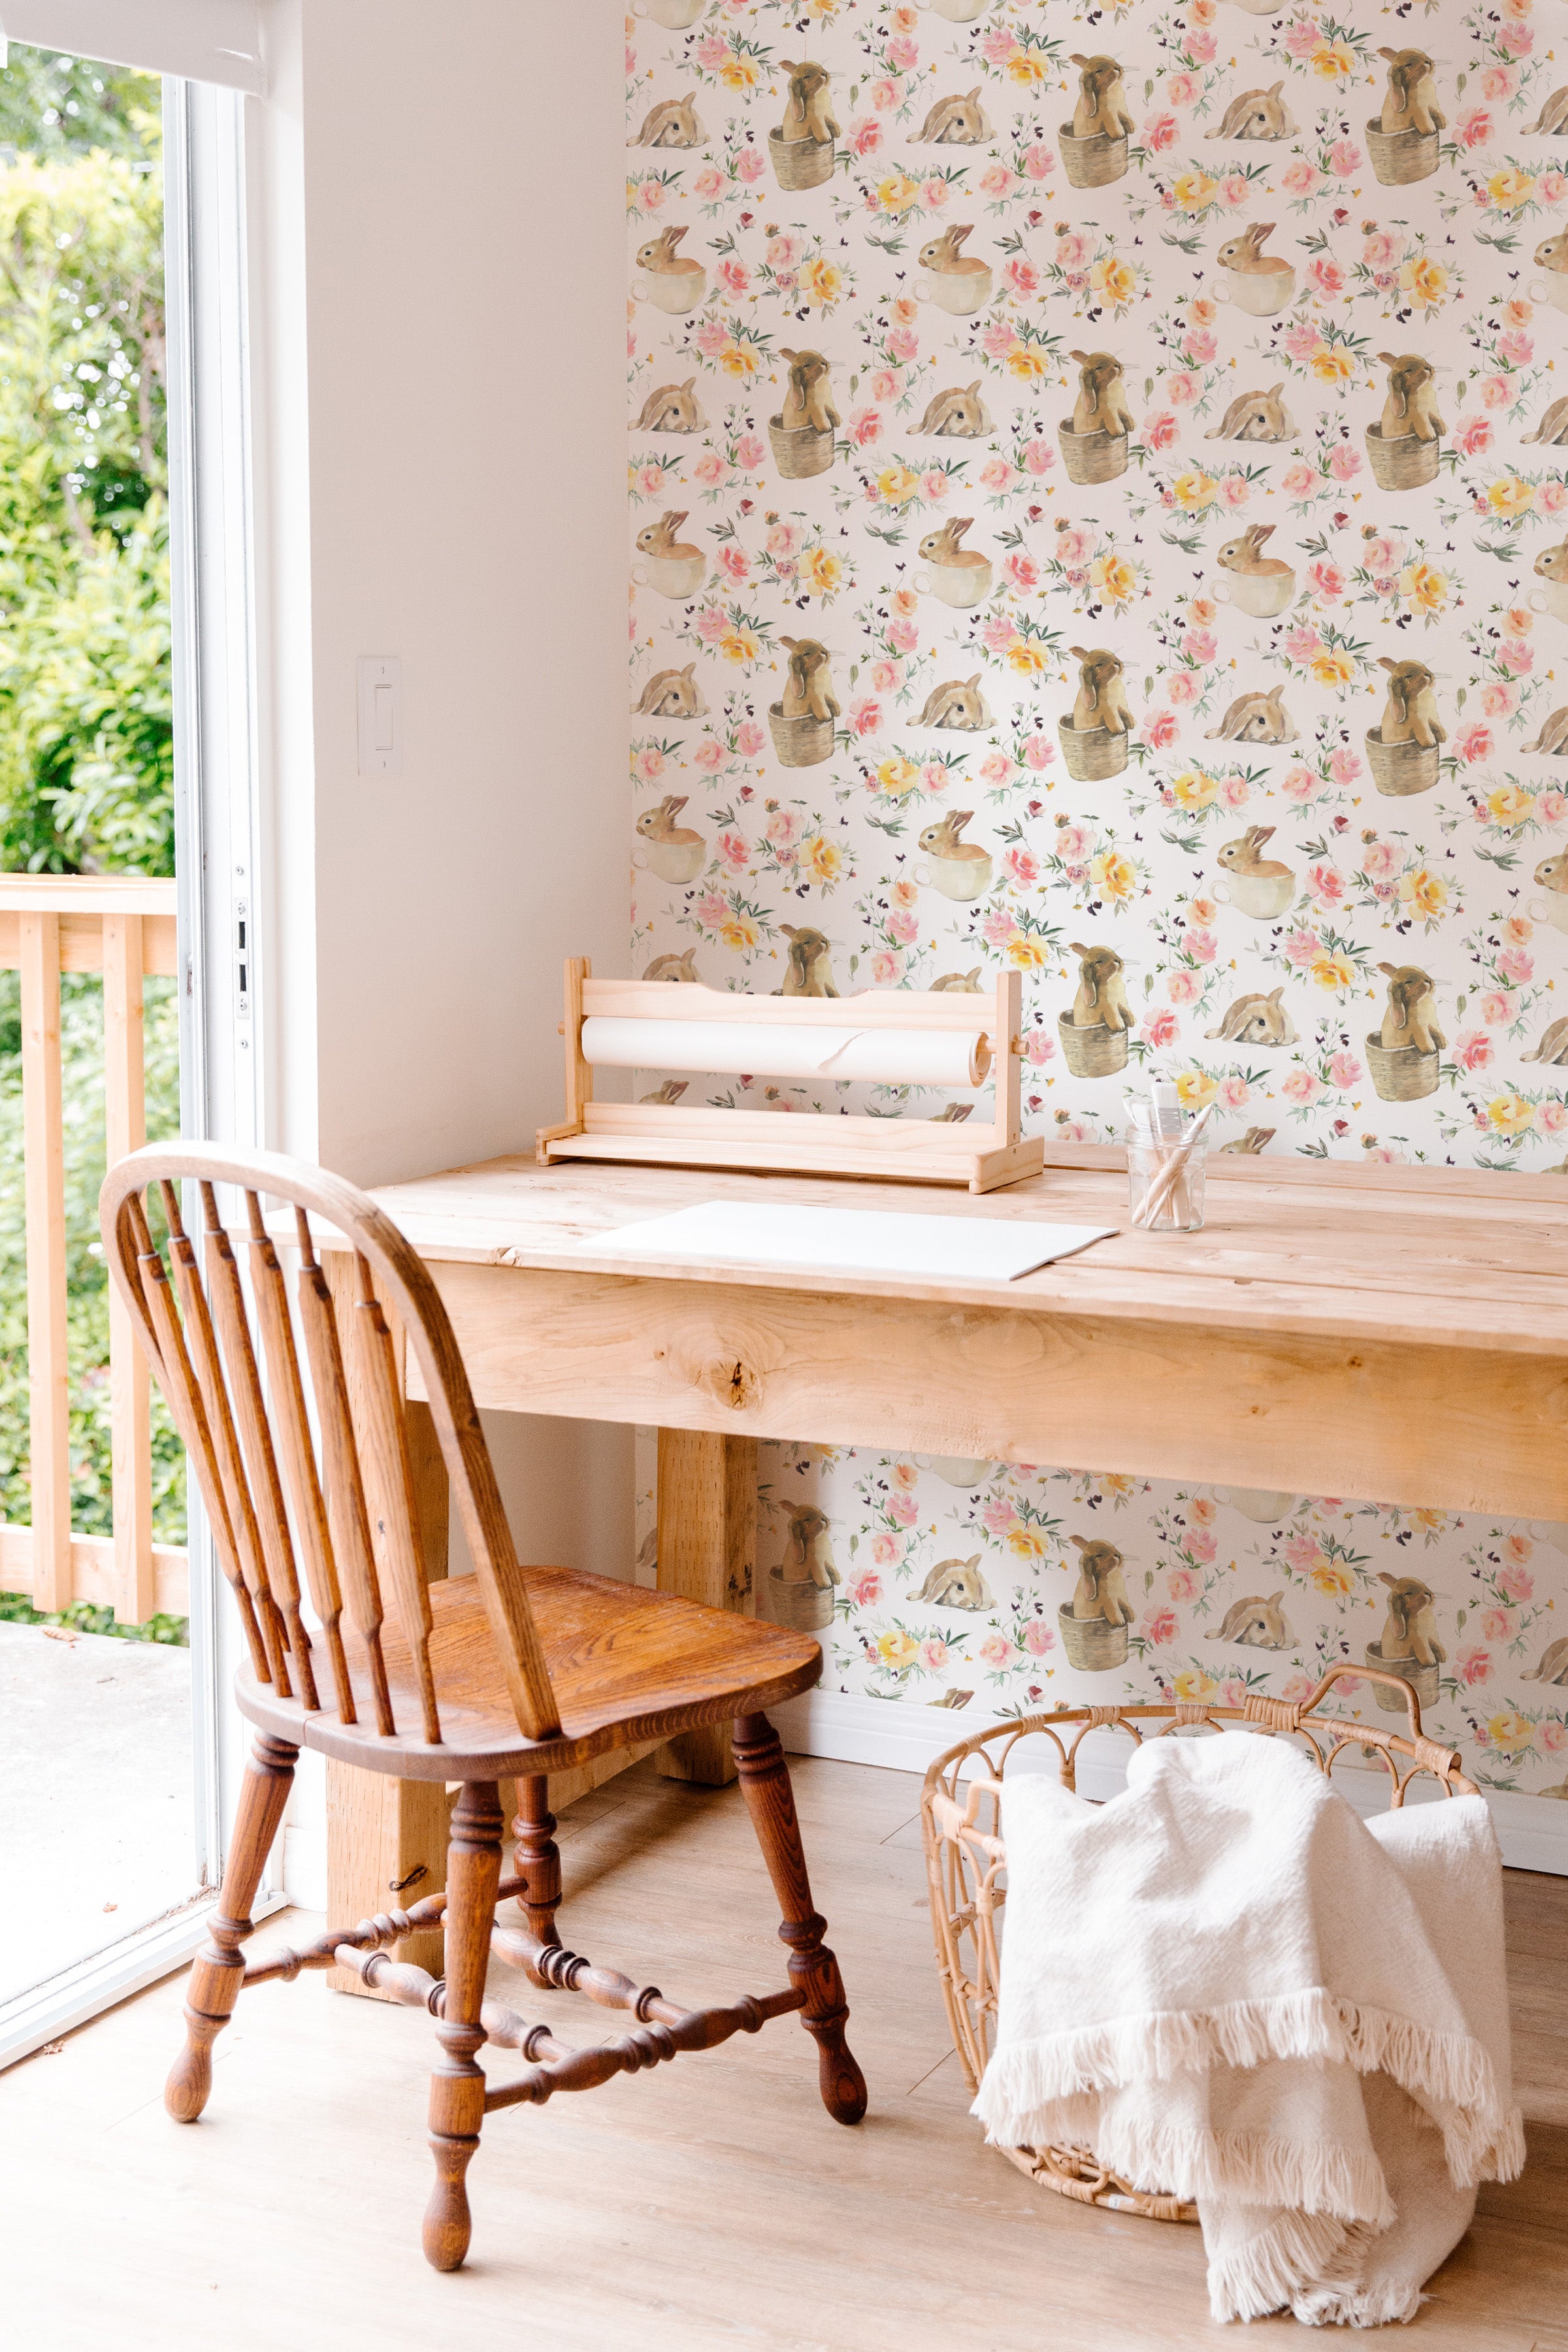 A cozy crafting area featuring the Garden Bunnies Wallpaper, which displays playful rabbits nestled in baskets among soft floral designs. The scene includes a sturdy wooden chair and table, creating a warm, inviting workspace.